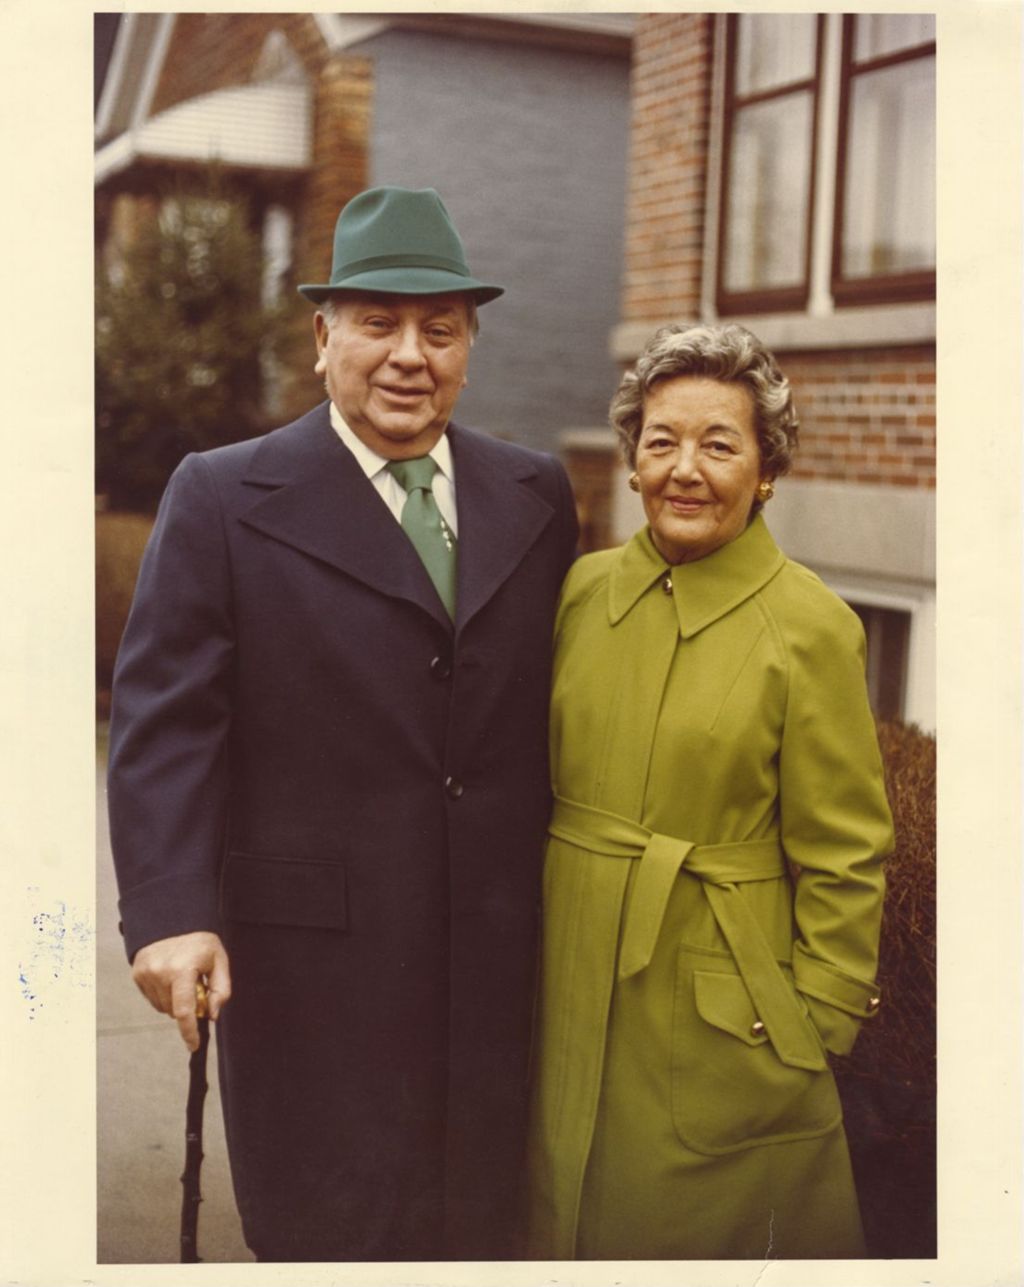 St. Patrick's Day, Eleanor and Richard J. Daley